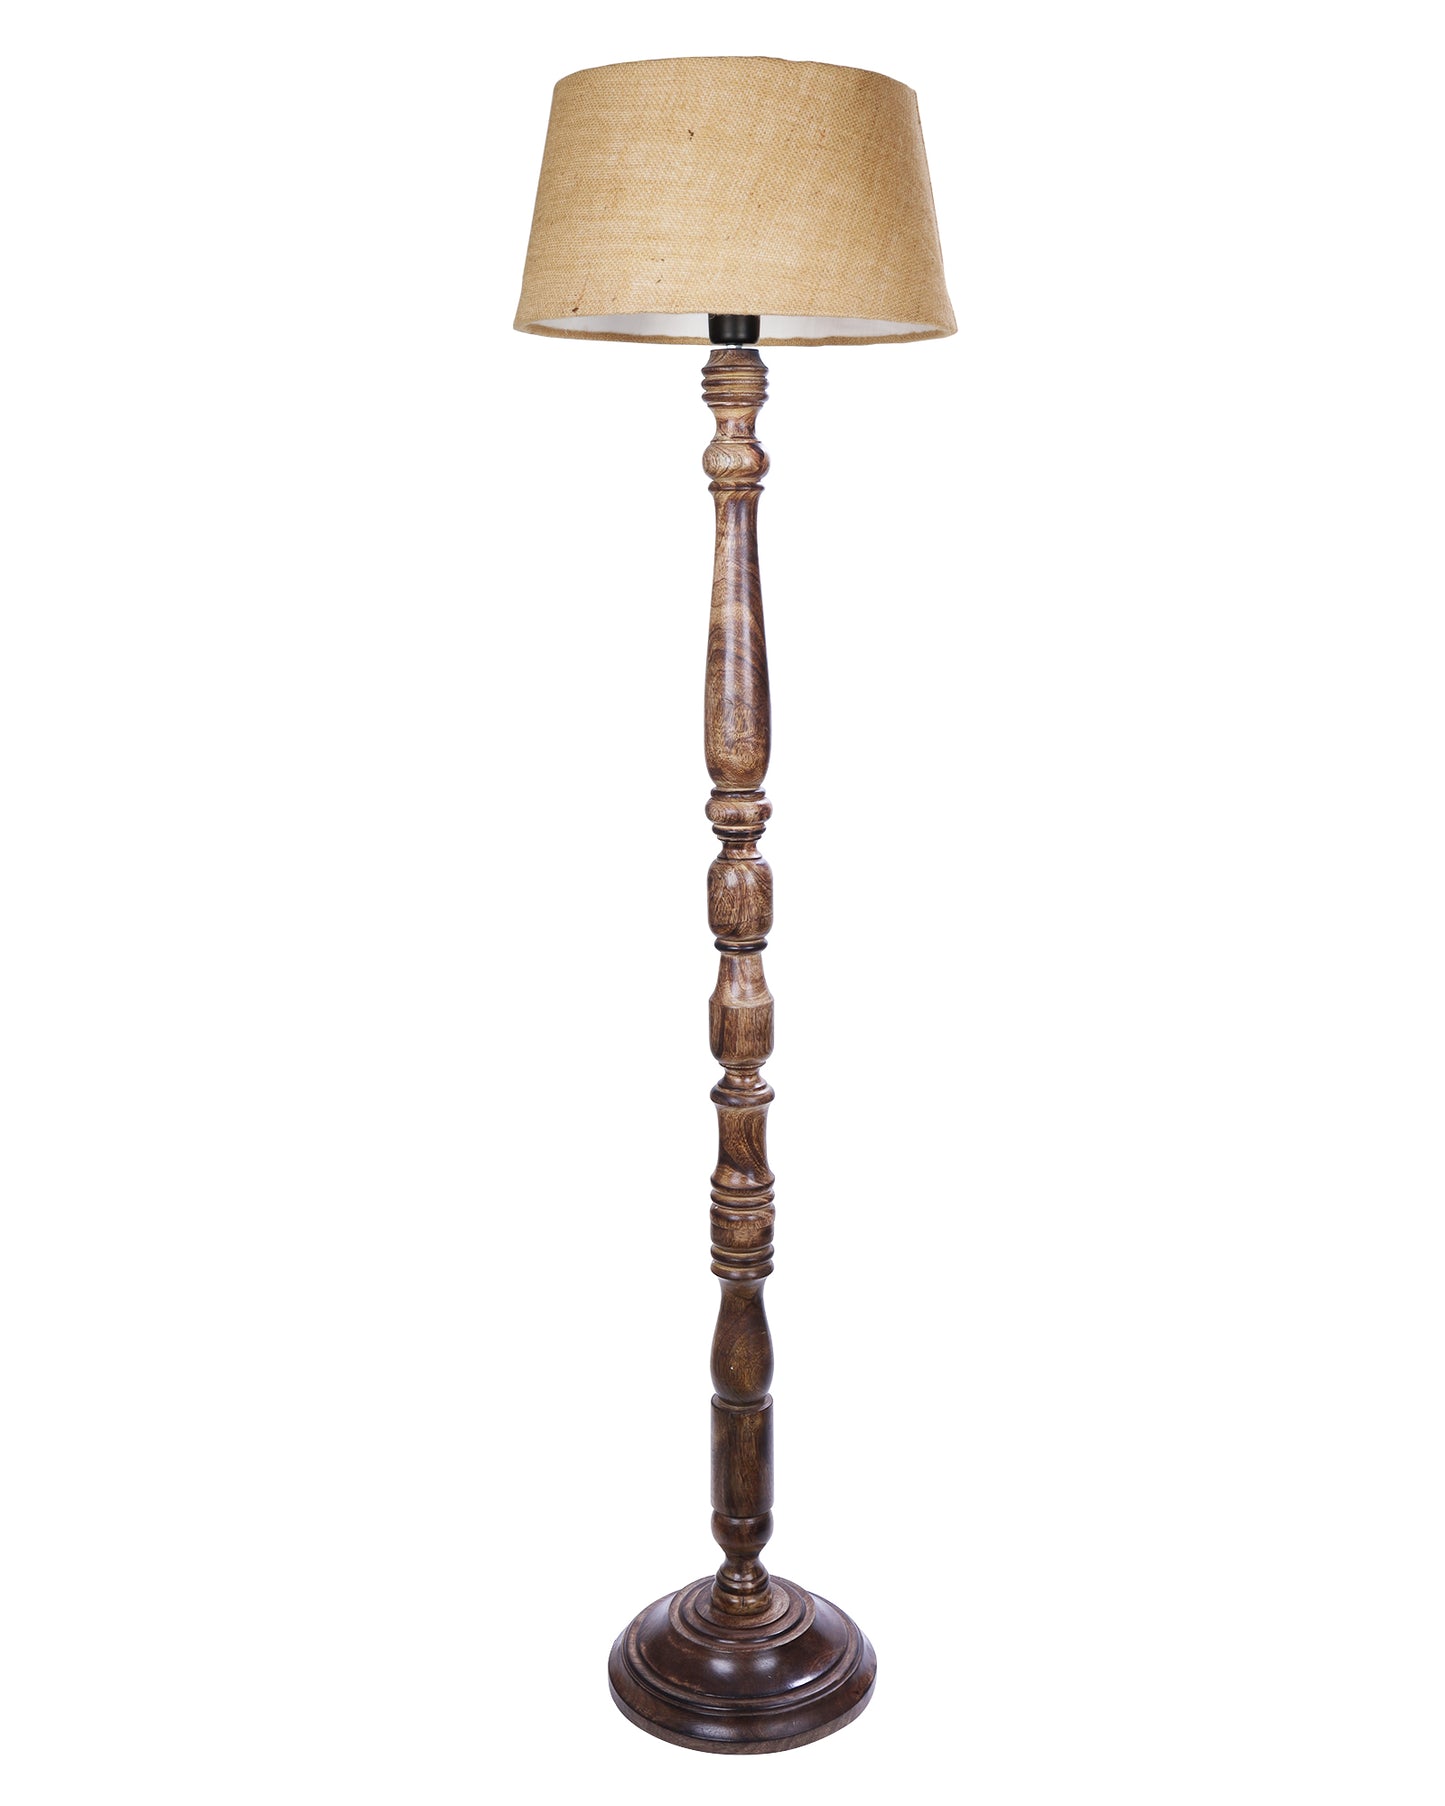 Classic Rustic Eclipse Black Finish Wooden Floor Lamp with Shade